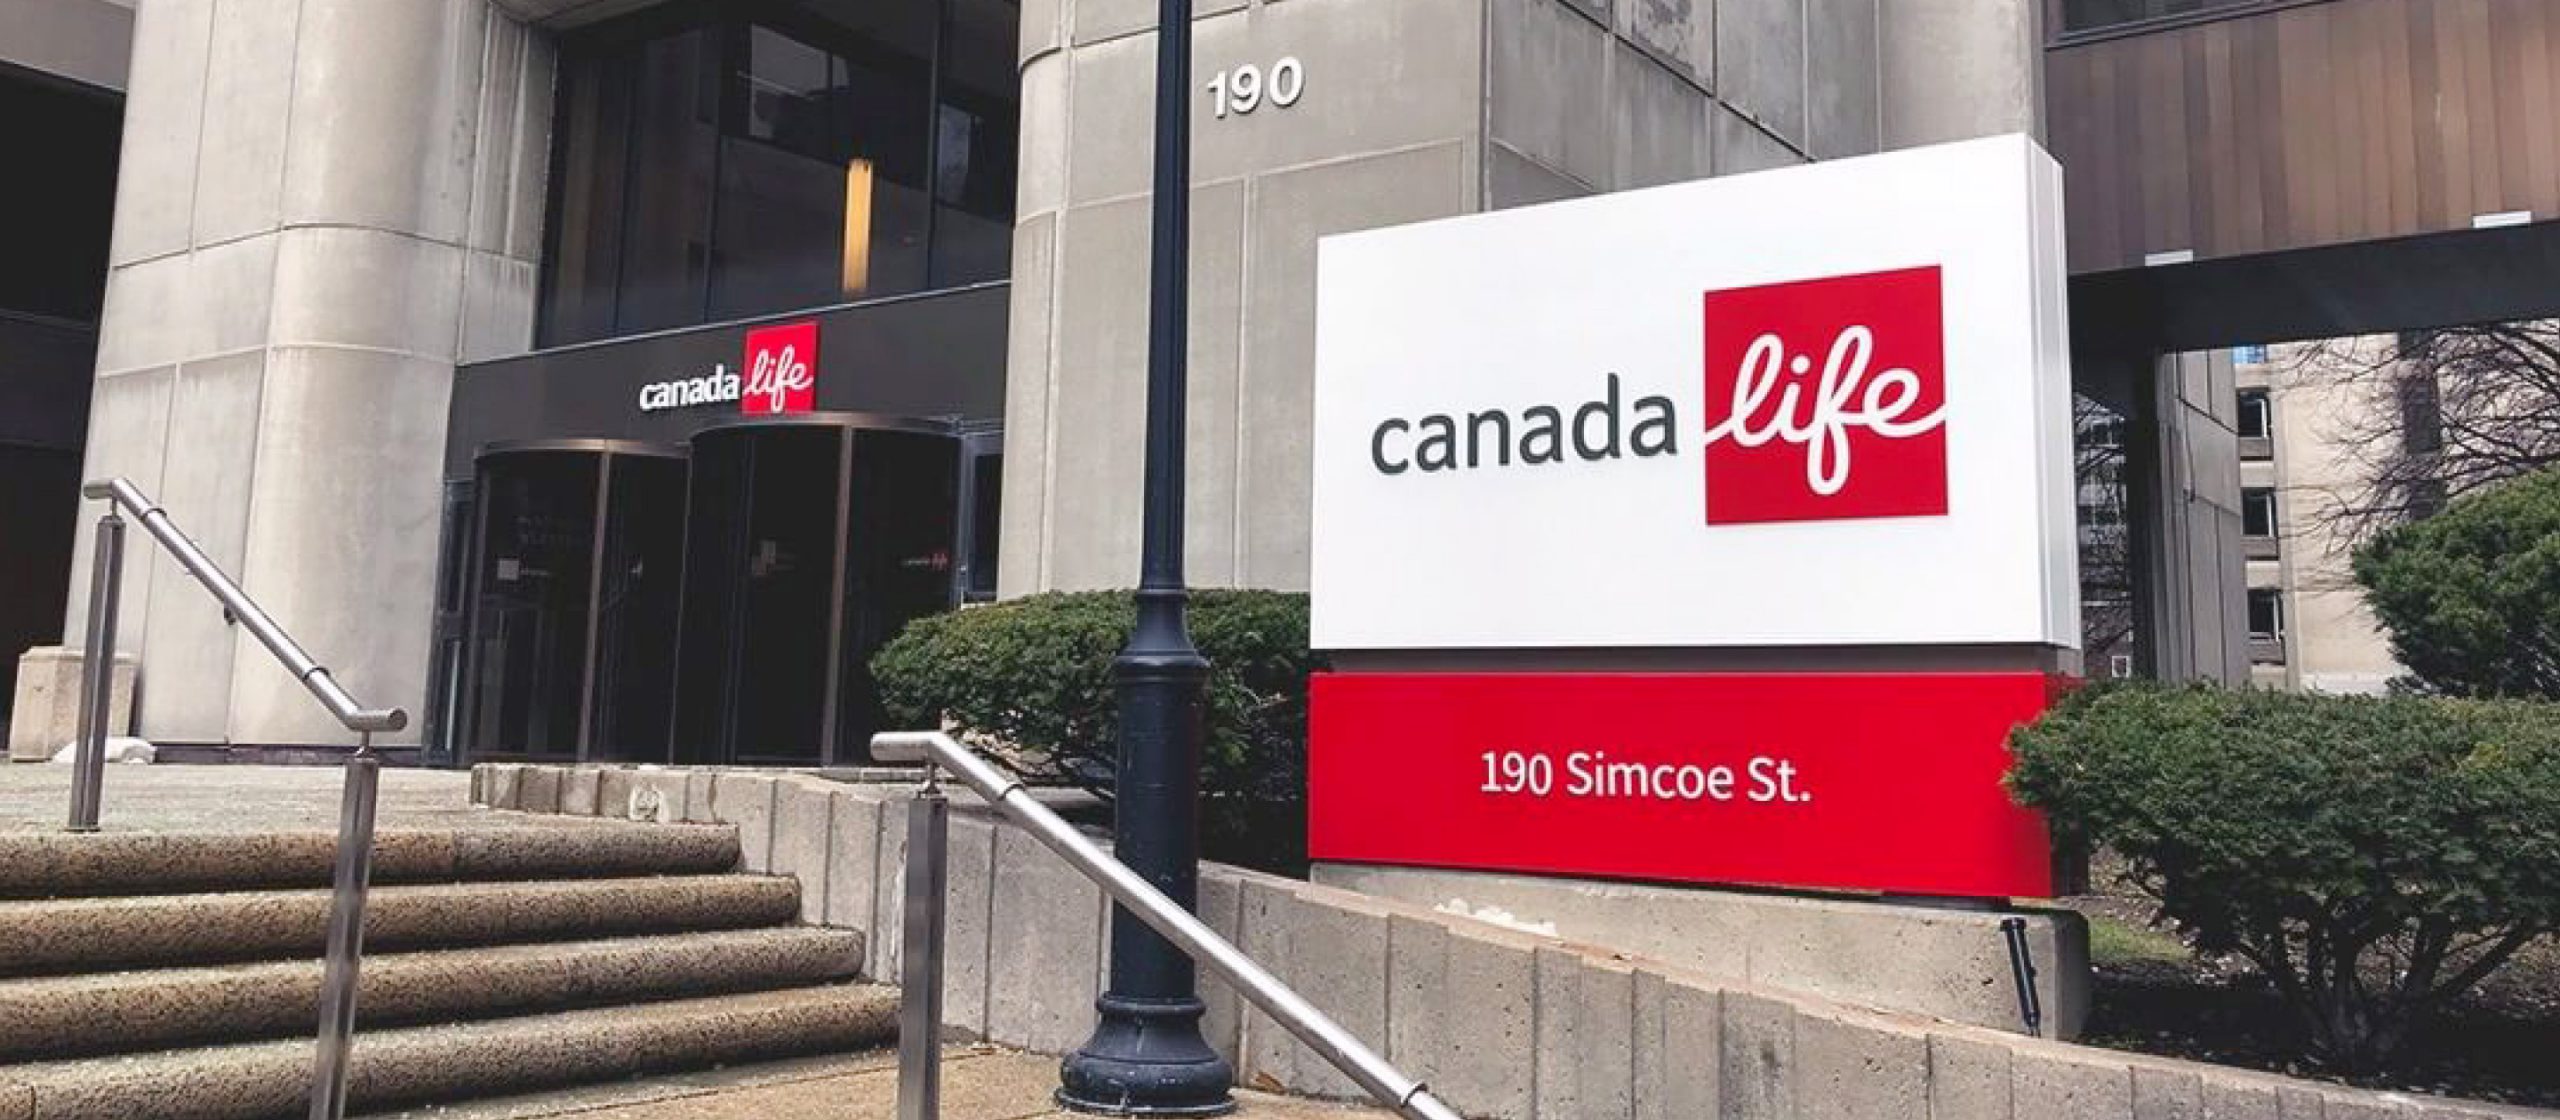 Custom fabricated Canada Life branded podium sign with red base, located outside 190 Simcoe St., Toronto